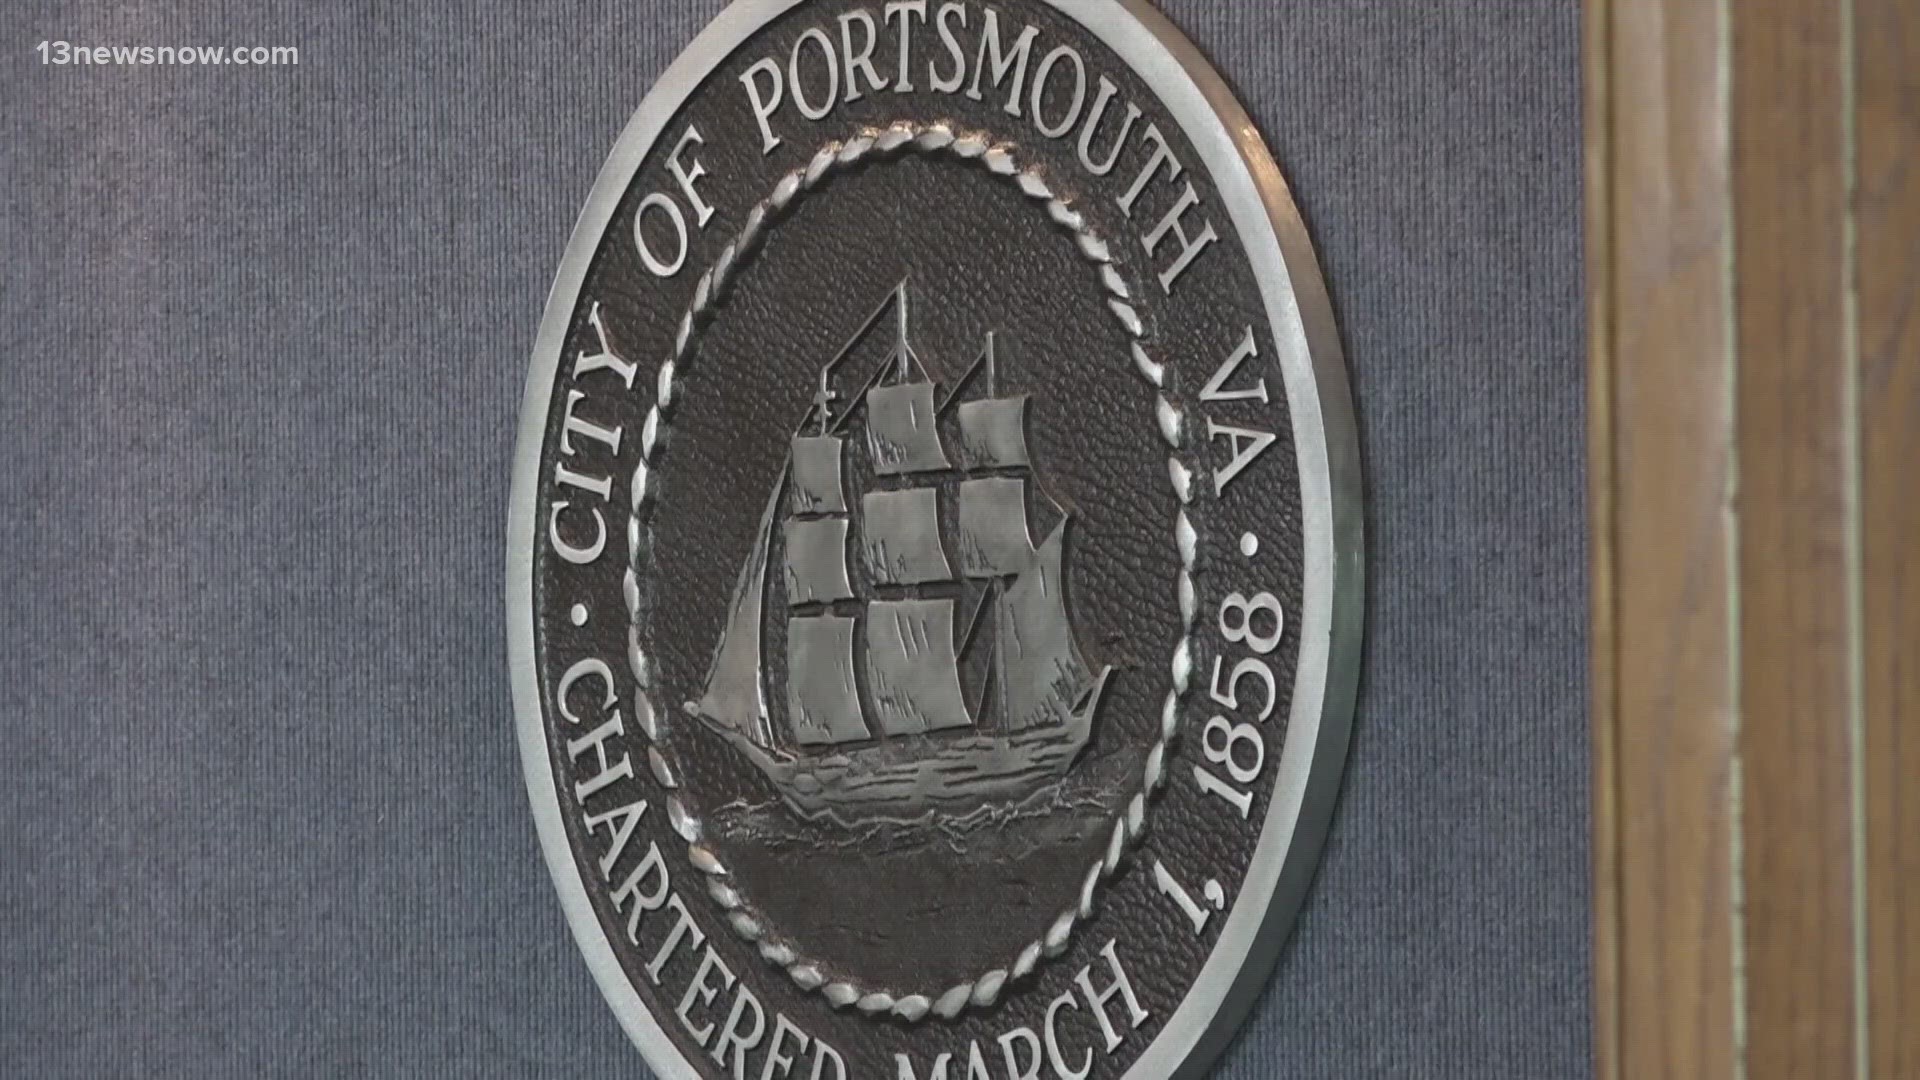 Portsmouth gets its fifth city manager in four years, with Steven Carter beginning as more city officials are out in more firings.